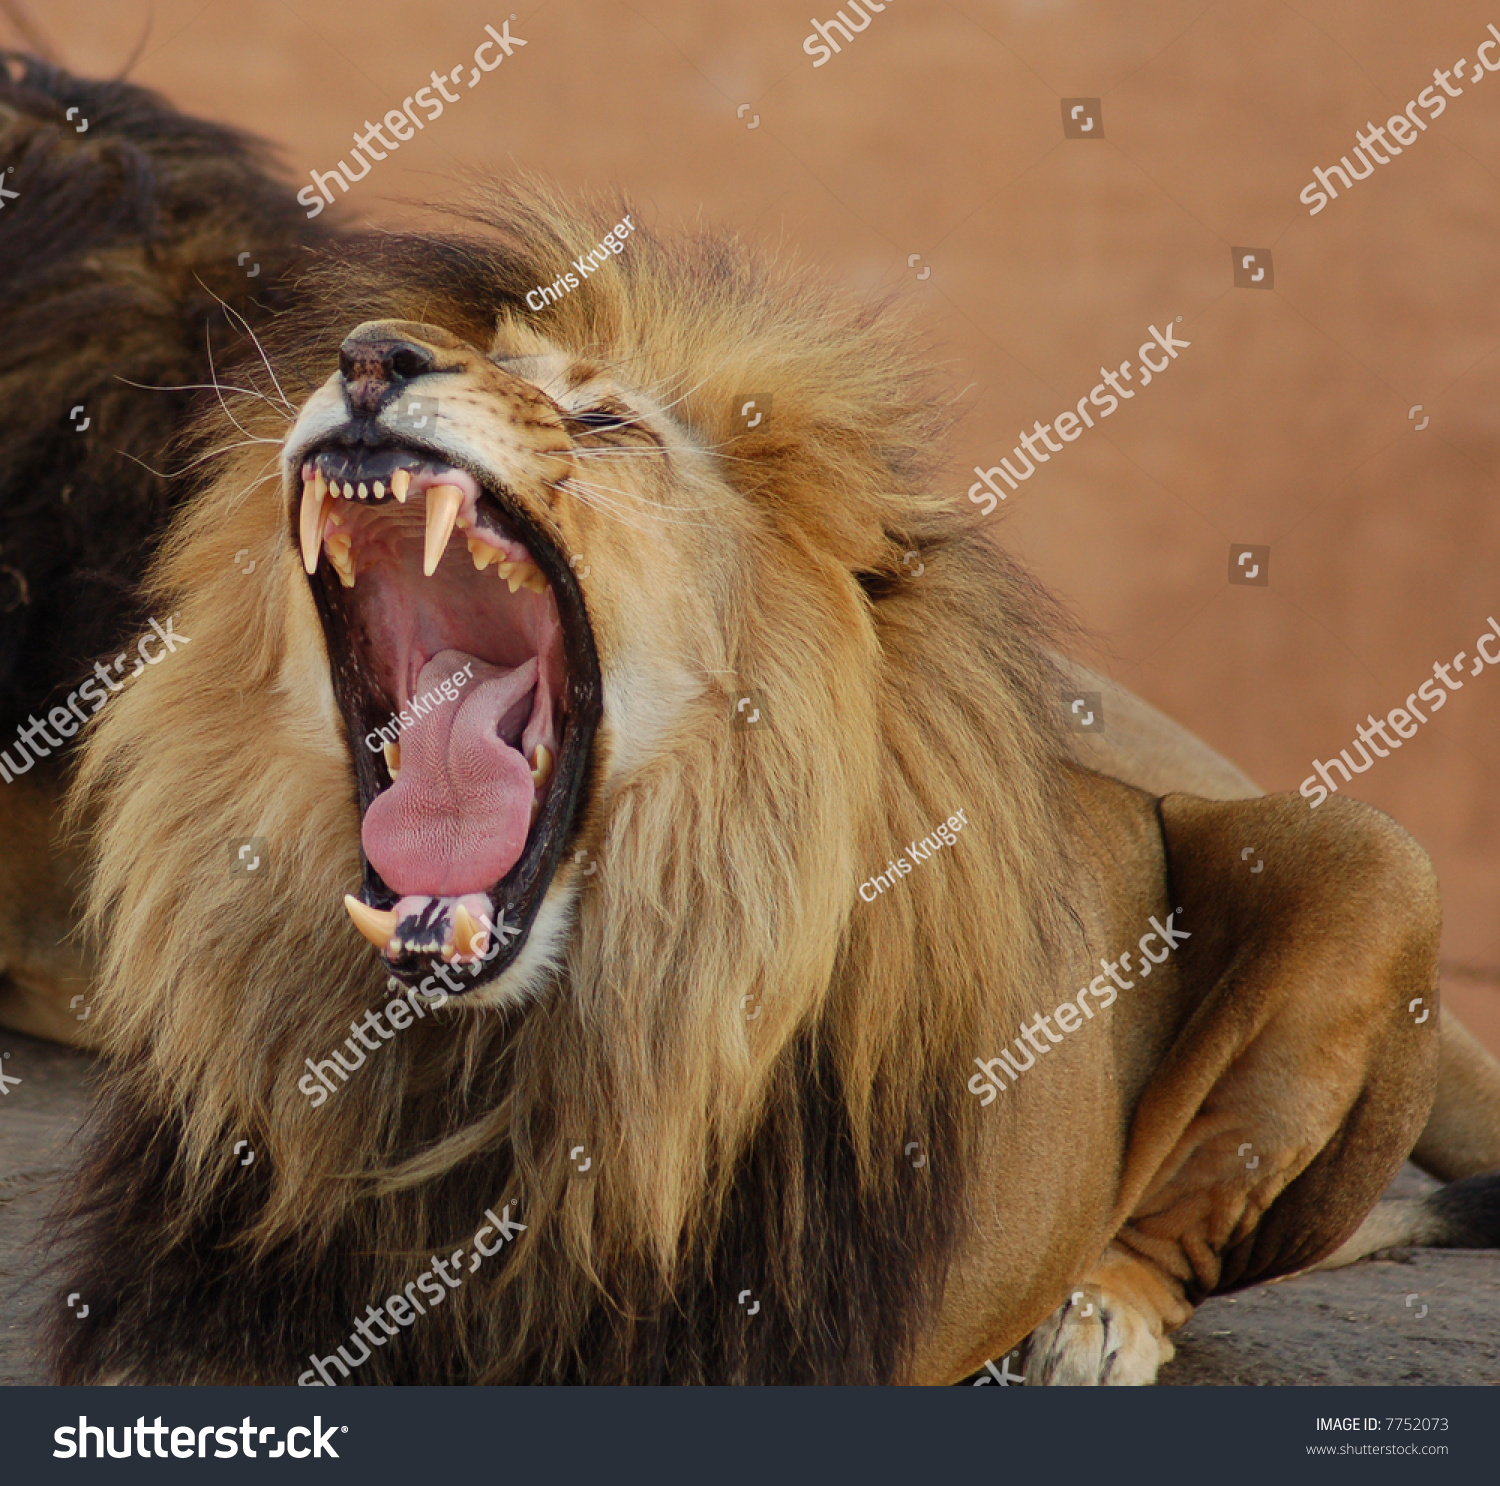 Top 10 Most Powerful Animal Bites - Science/Technology - Nigeria